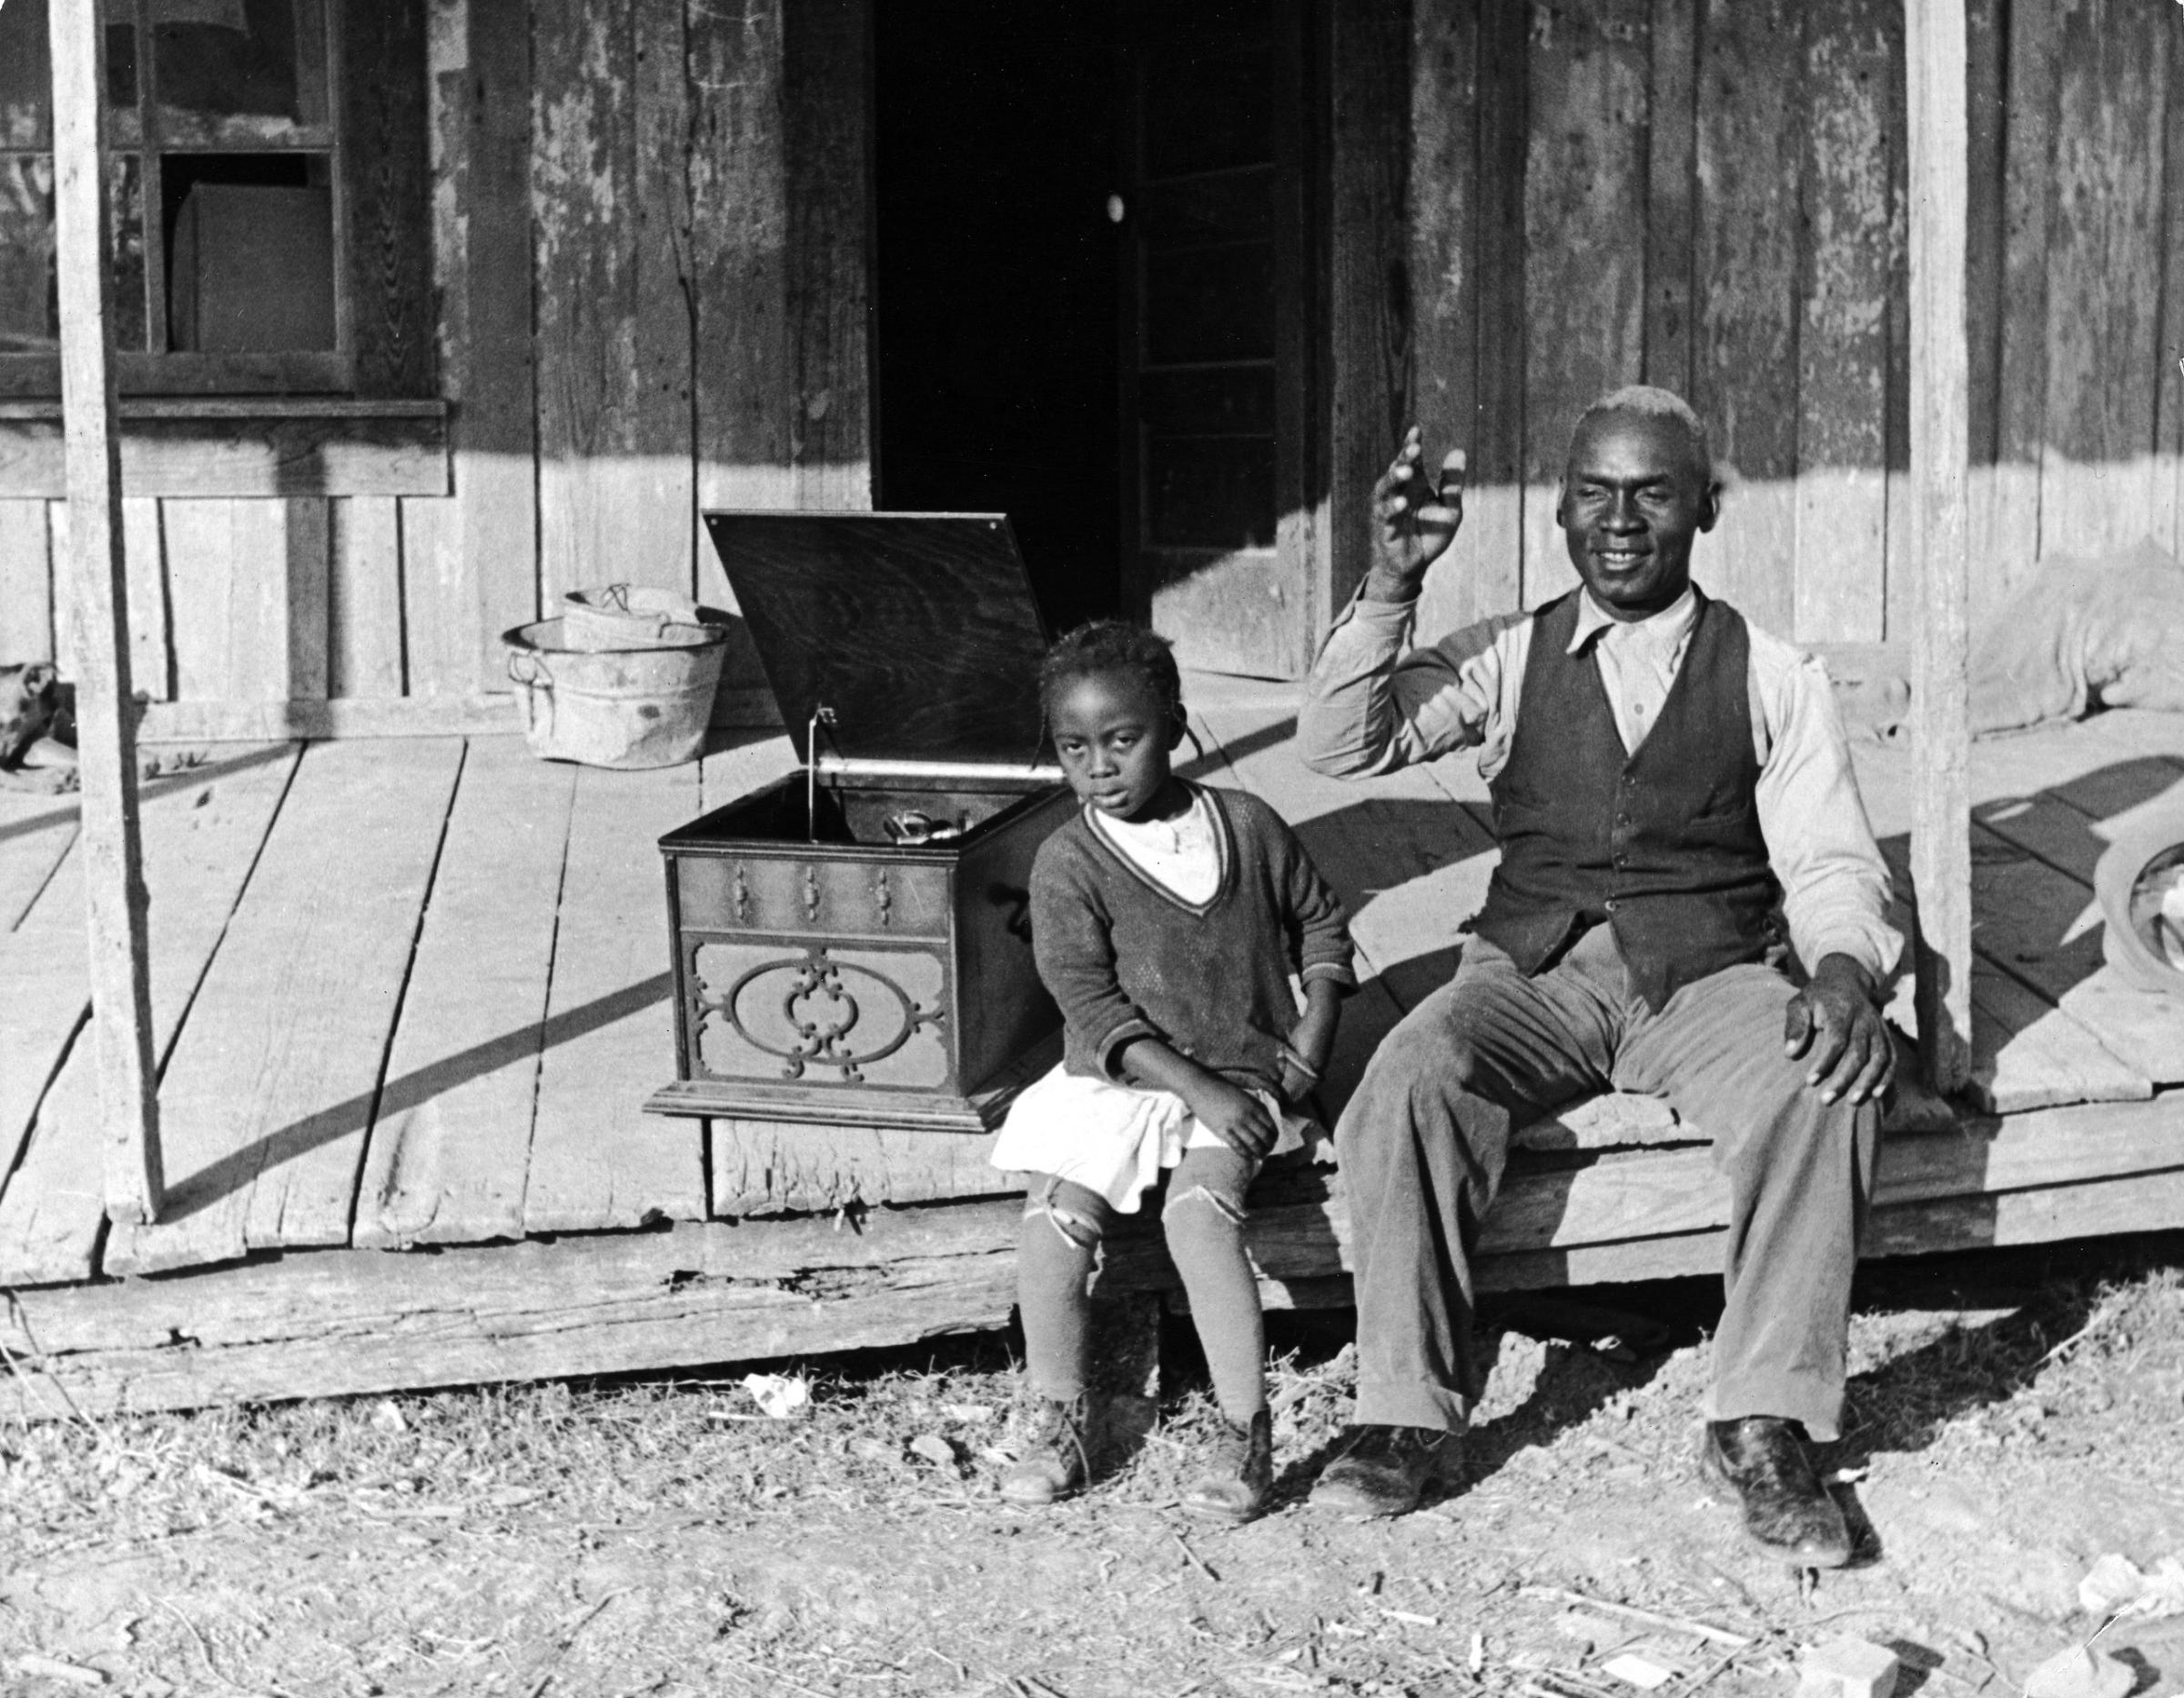 Lonnie Fair and his daughter listen to a Victrola on their sharecropping farm in Mississippi, 1936.